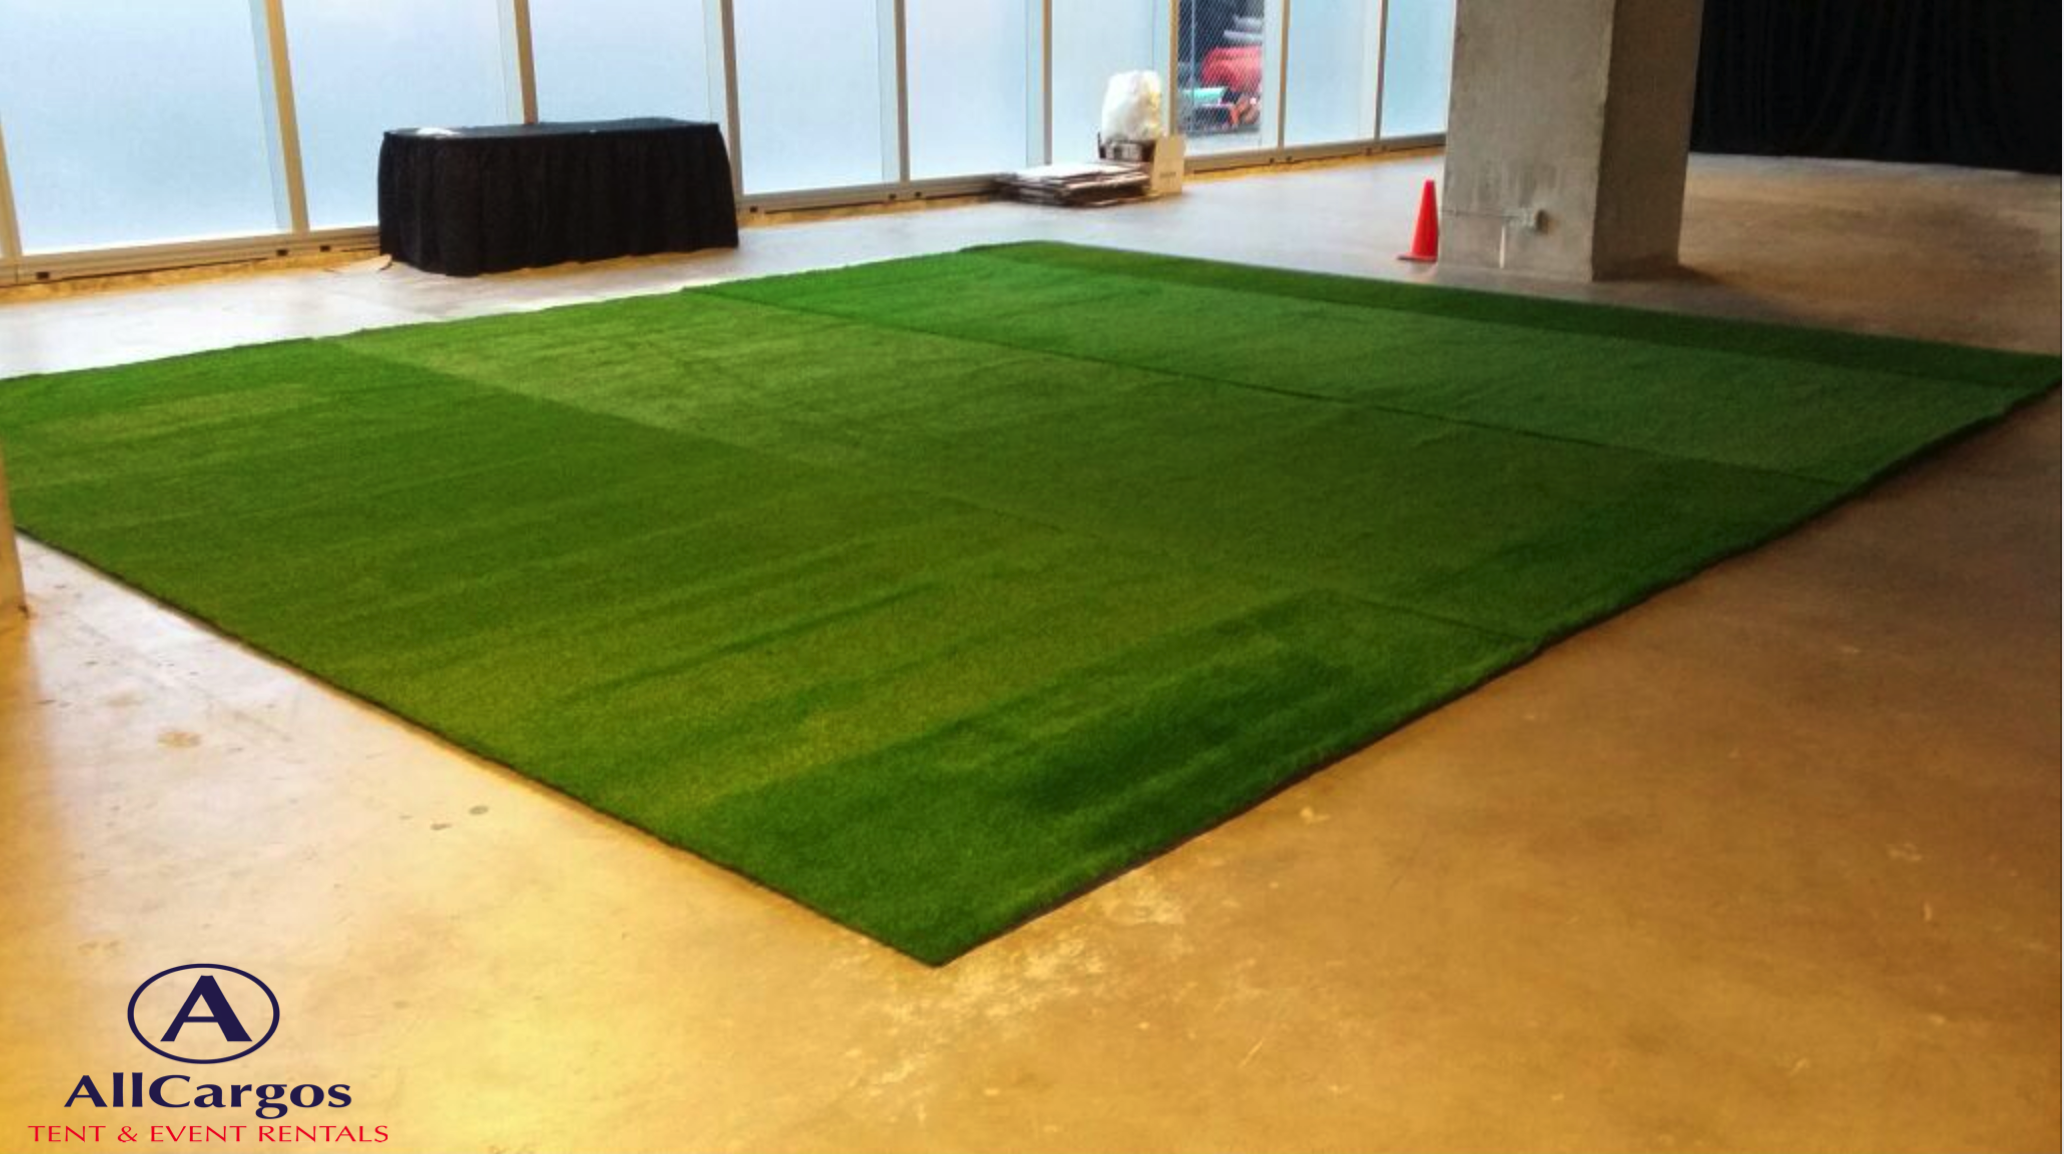 Bestseller FREE Delivery! Lytham 26mm Artificial Grass Astro Turf Fake Lawn 